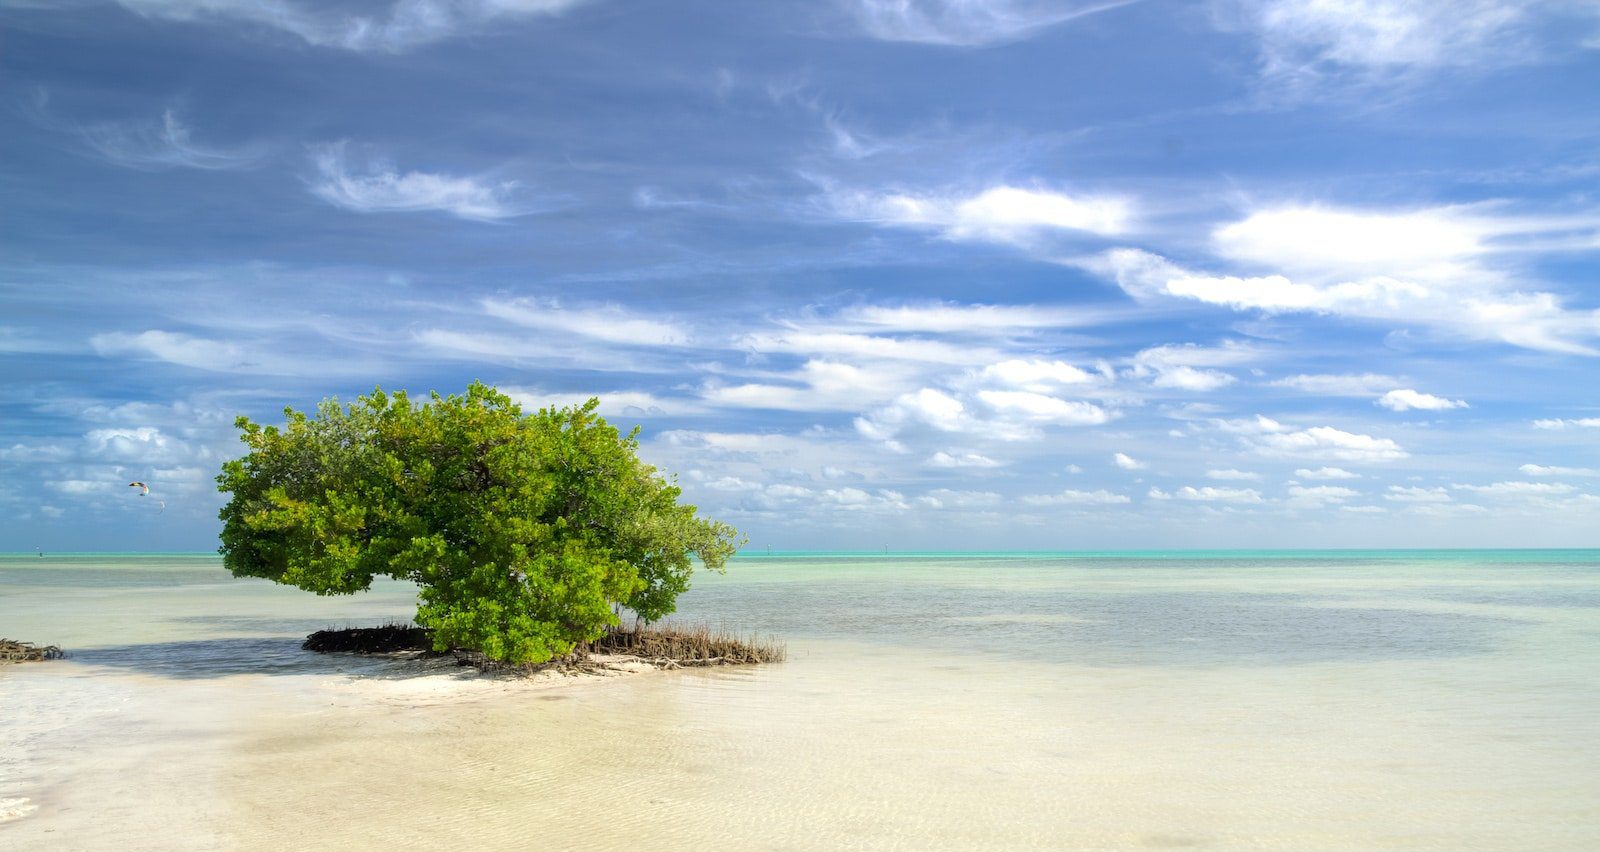 Image of a tree growing on the watery beach at Anne’s Beach, Florida